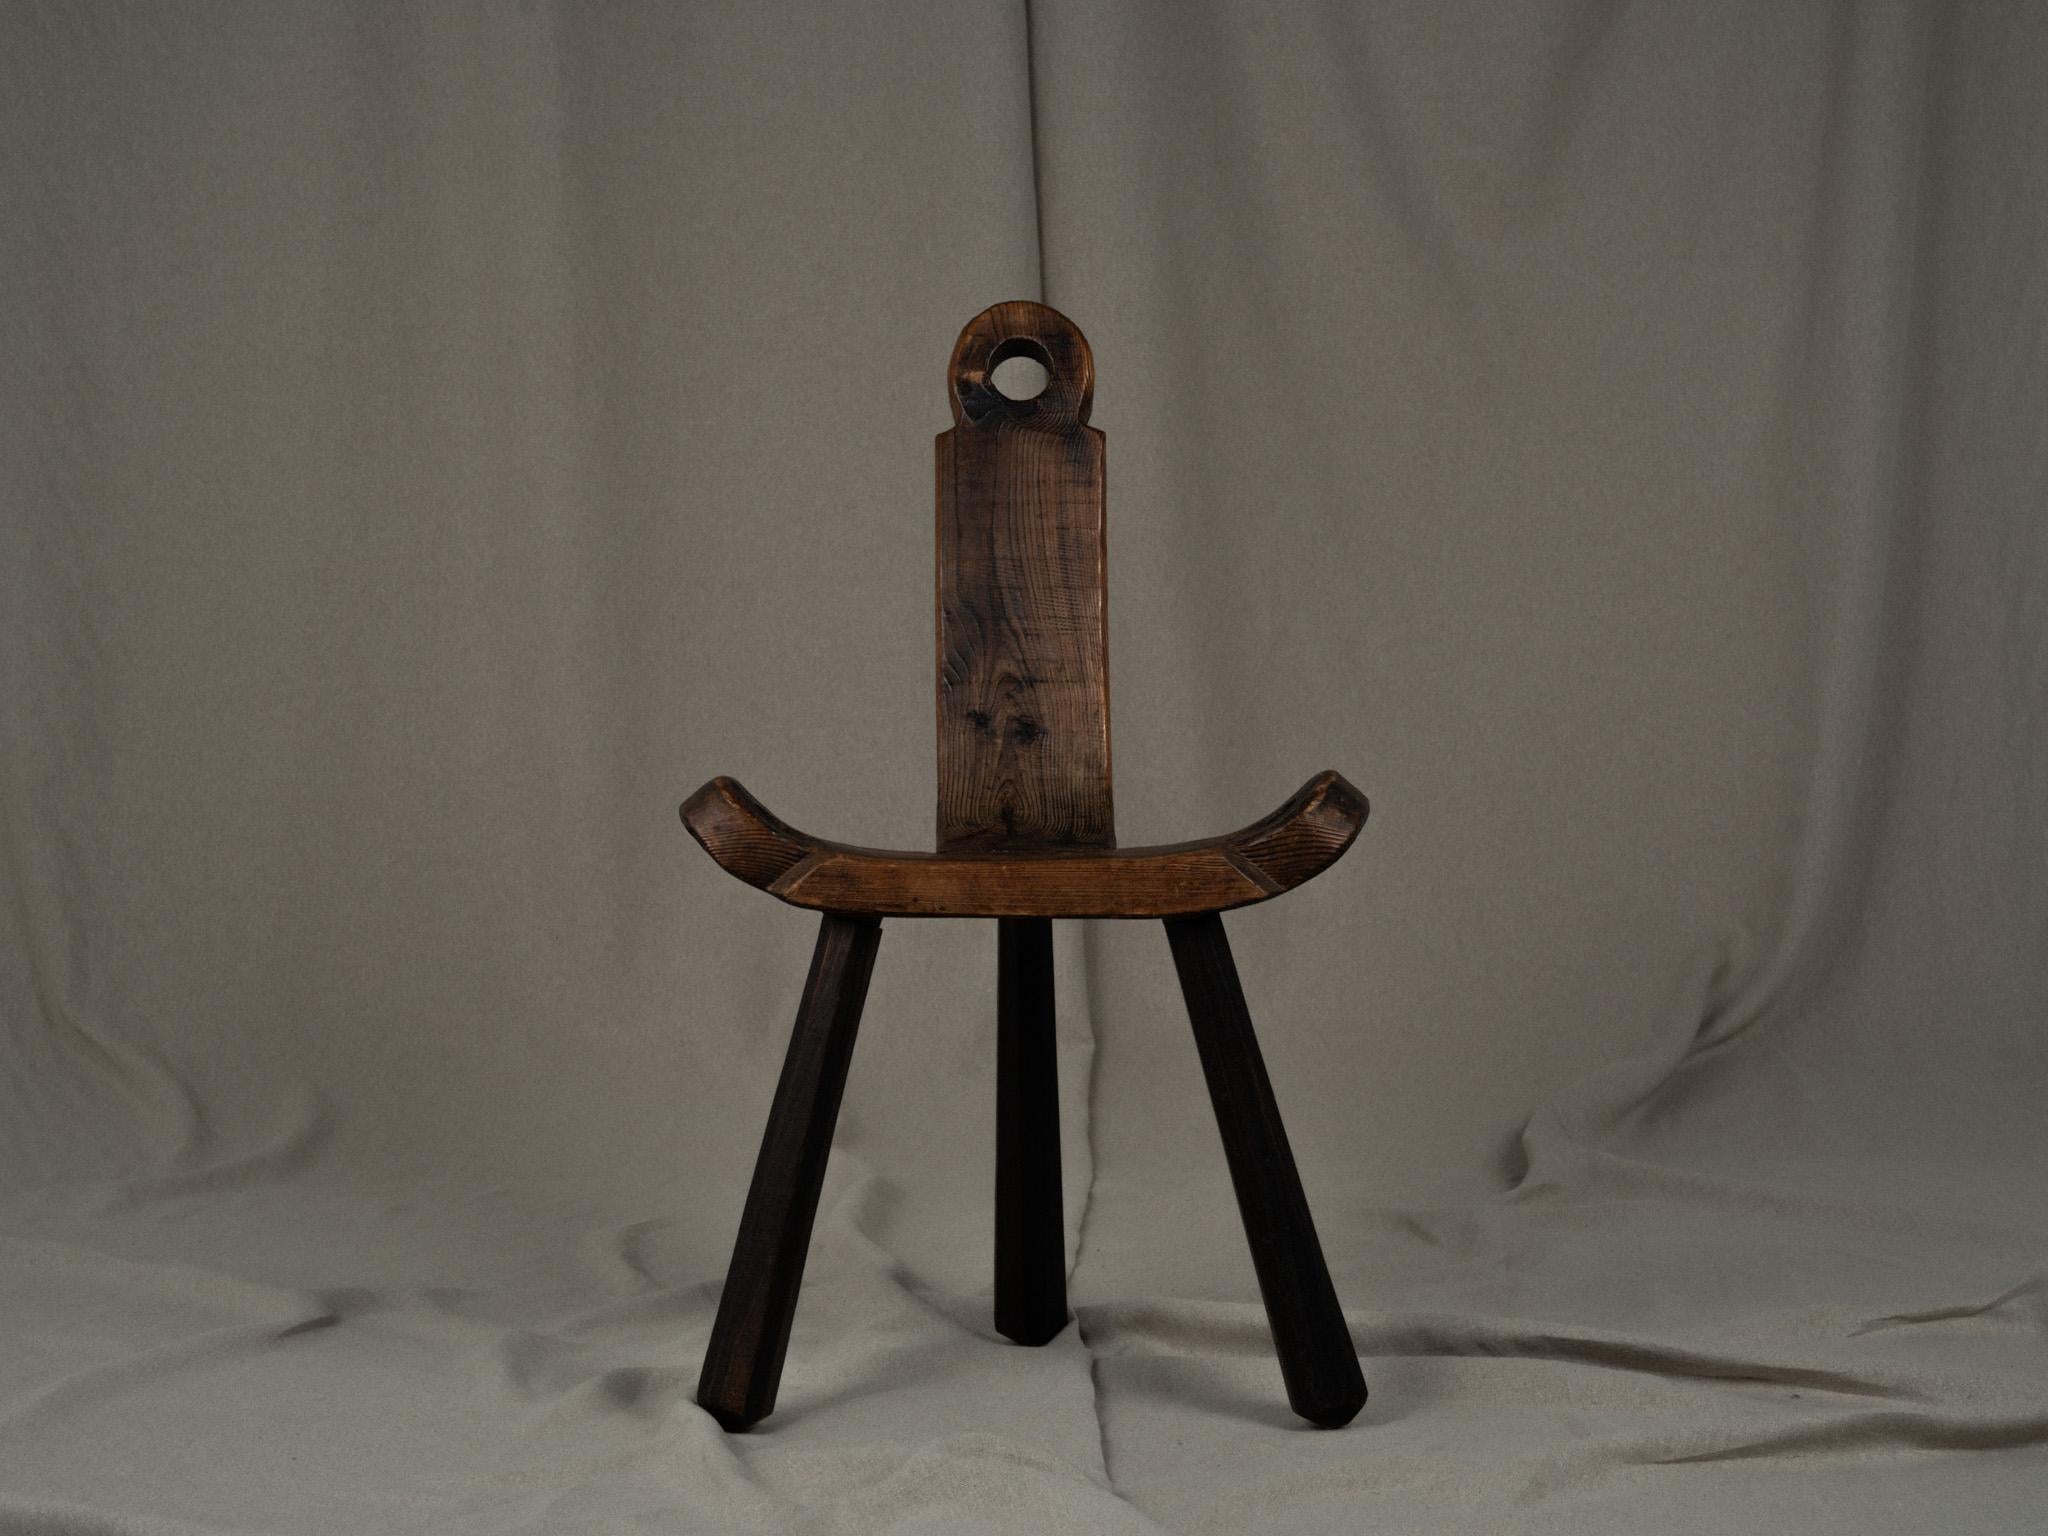 Primitive wooden craved tripod chair. A beautiful brutalist object with a fine patina. Hand-crafted in the early 20th century. Made from solid wood and historically used as a birthing chair. Rectangular seat supported by three wooden tapered legs.